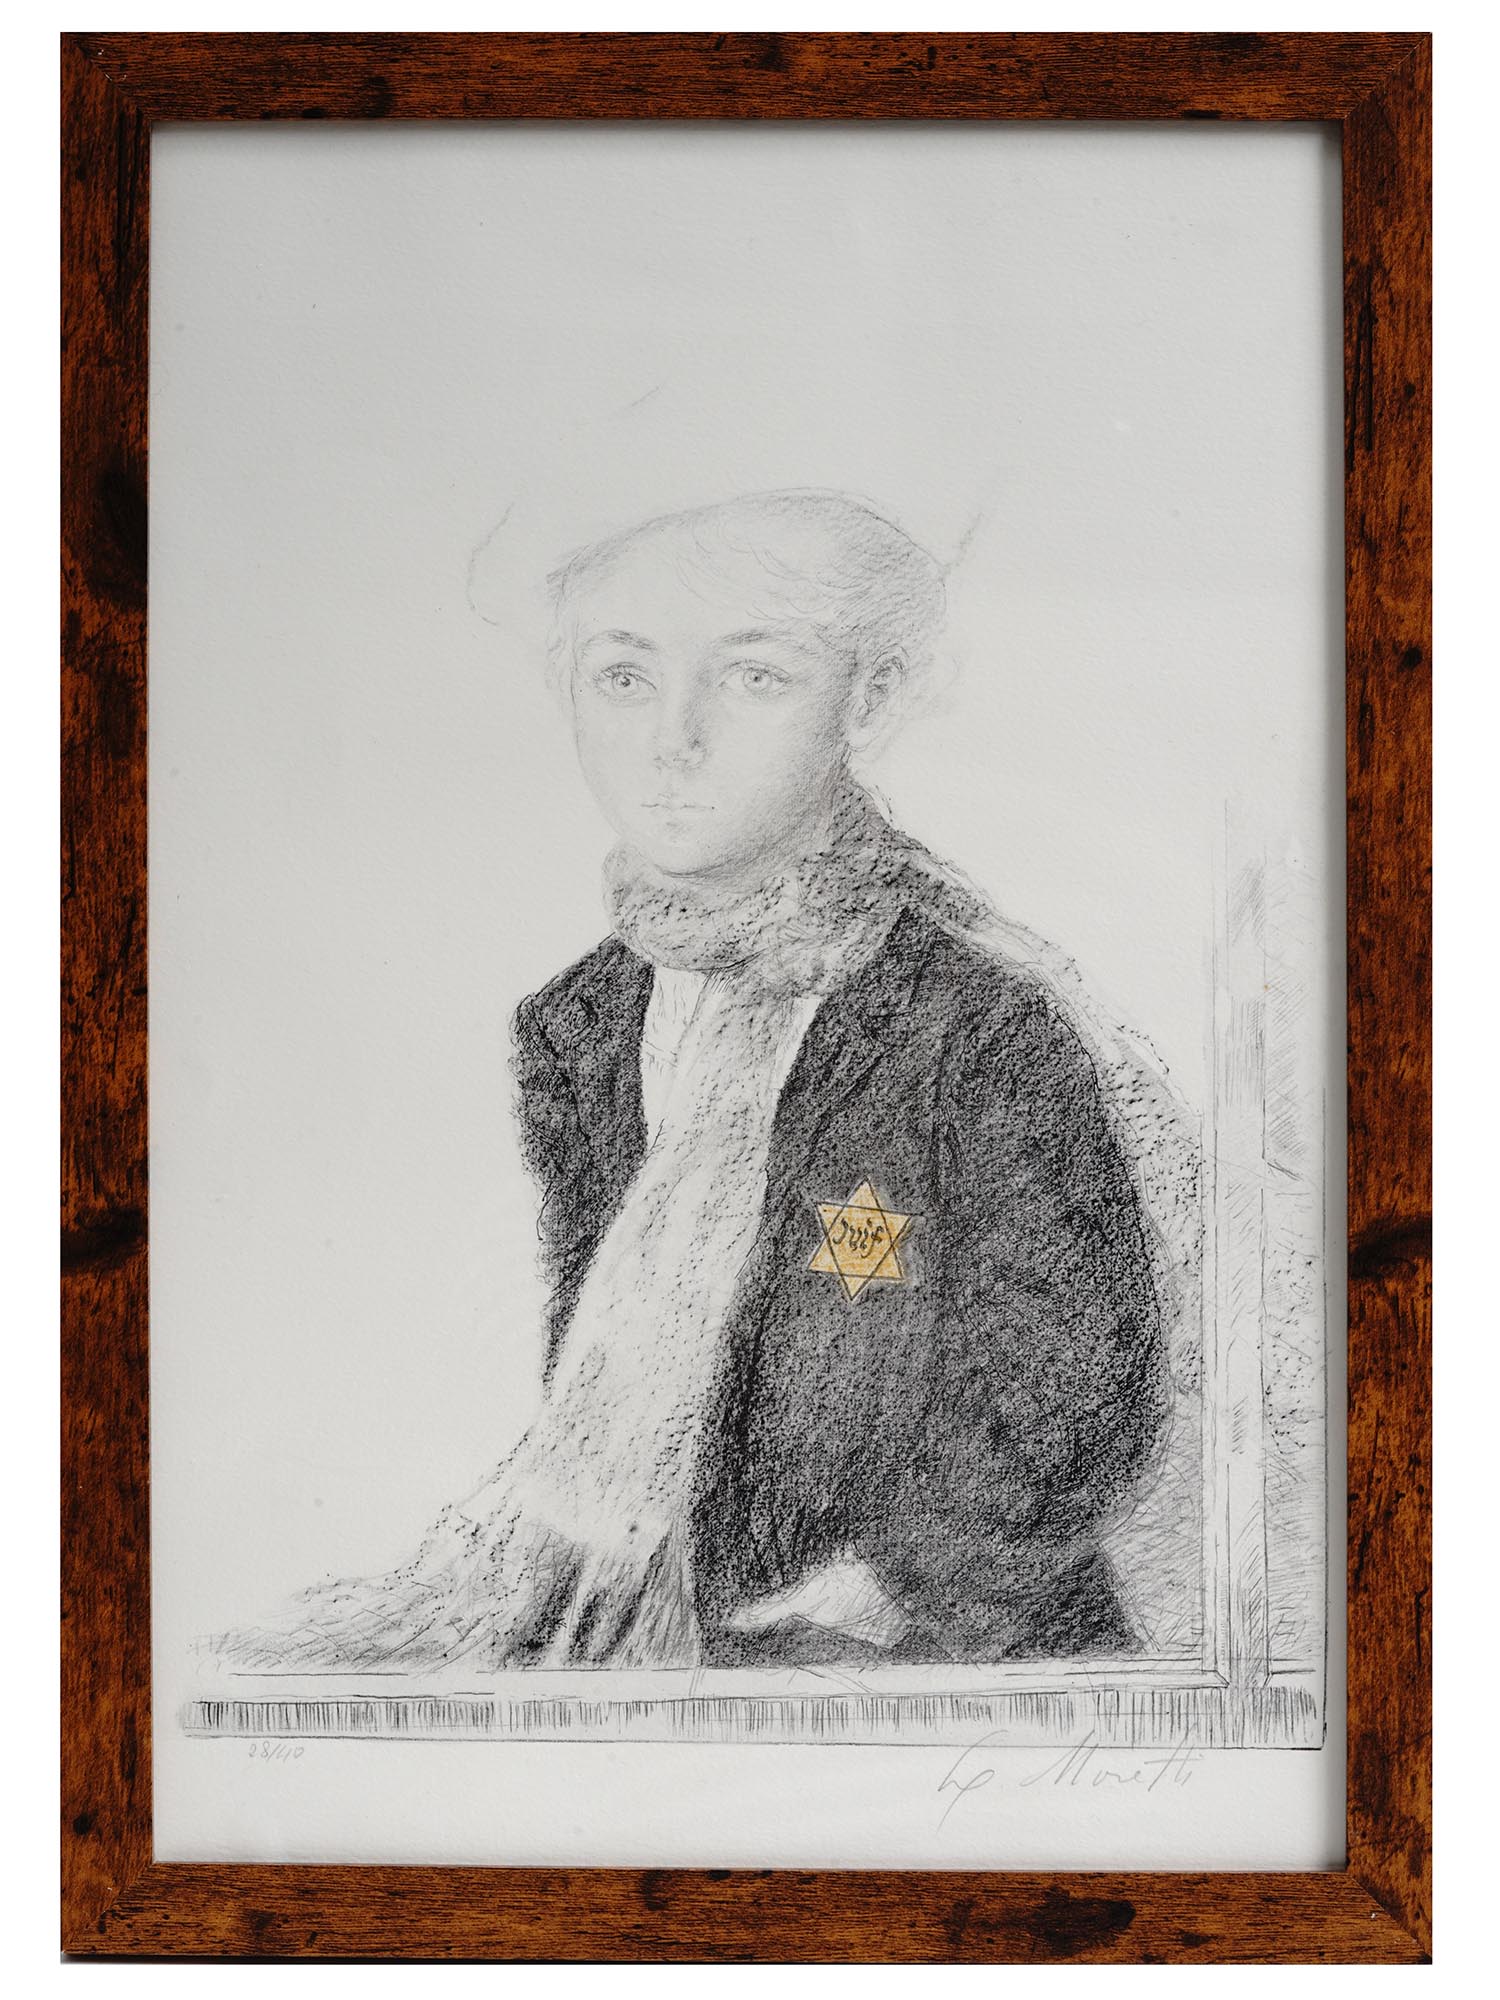 FRENCH JUDAICA BOY LITHOGRAPH BY LUCIEN MORETTI PIC-0